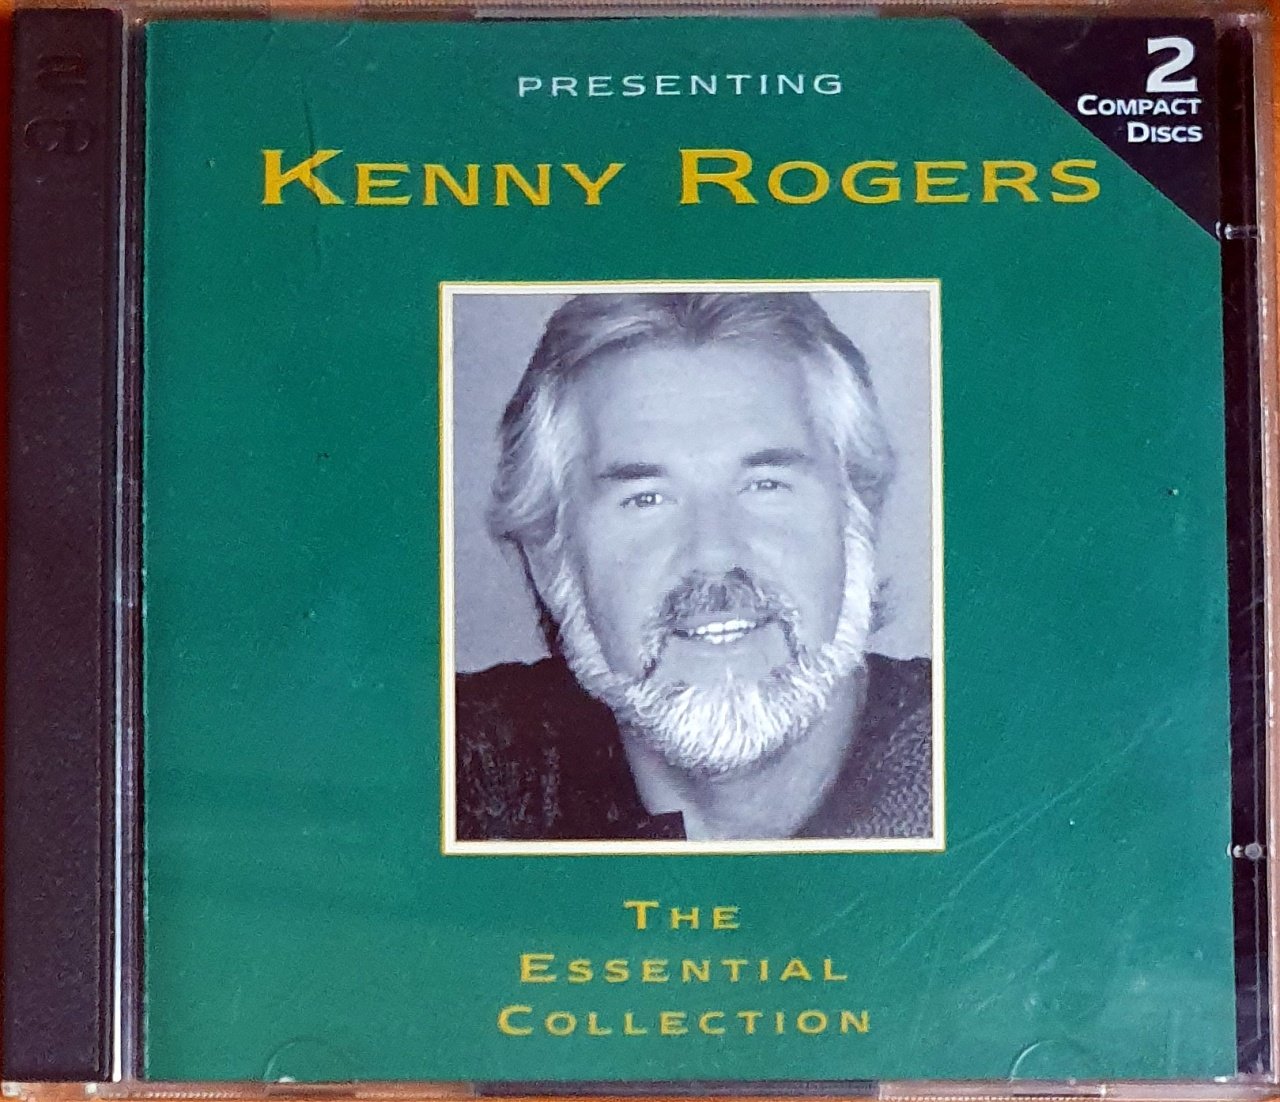 KENNY ROGERS - THE ESSENTIAL COLLECTION (1995) - 2CD 2.EL